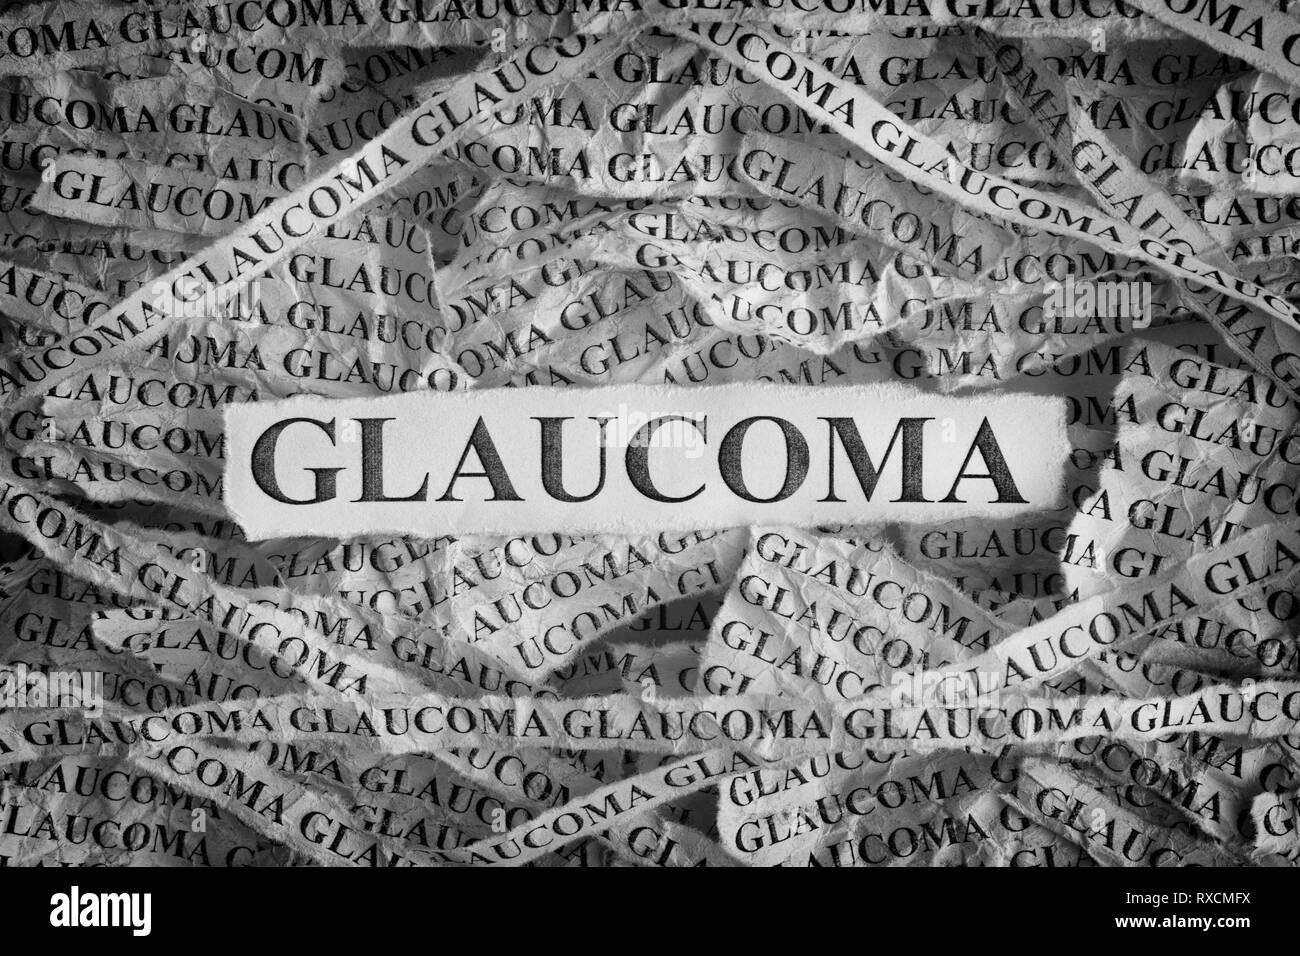 Glaucoma. Torn pieces of paper with the words Glaucoma. Concept image. Black and White. Close up. Stock Photo